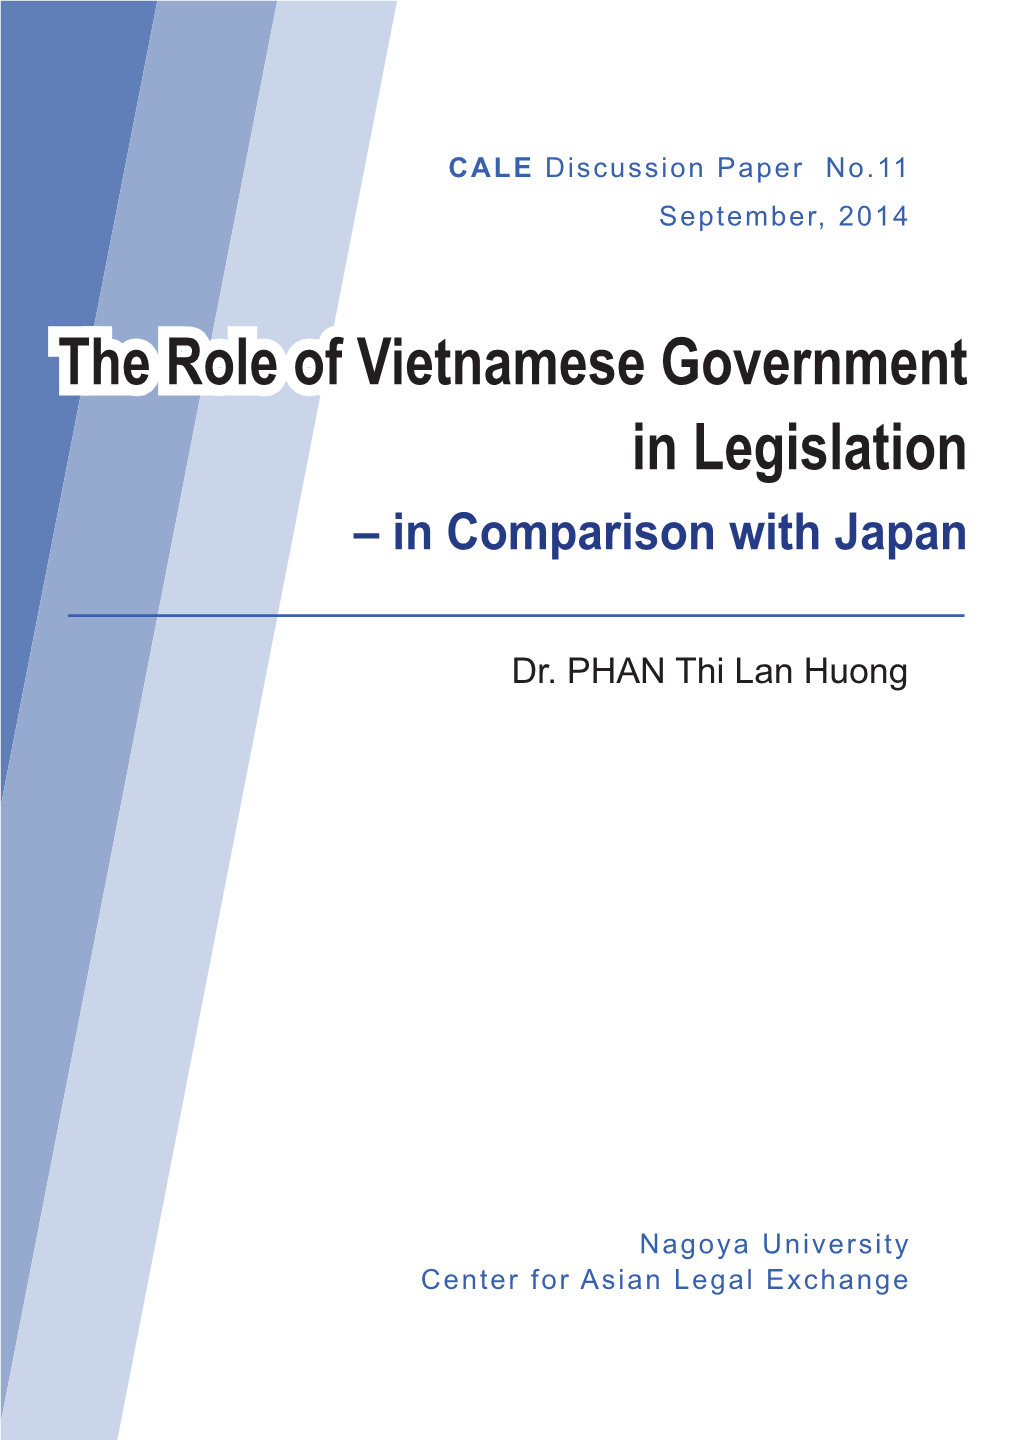 The Role of Vietnamese Government in Legislation – in Comparison with Japan